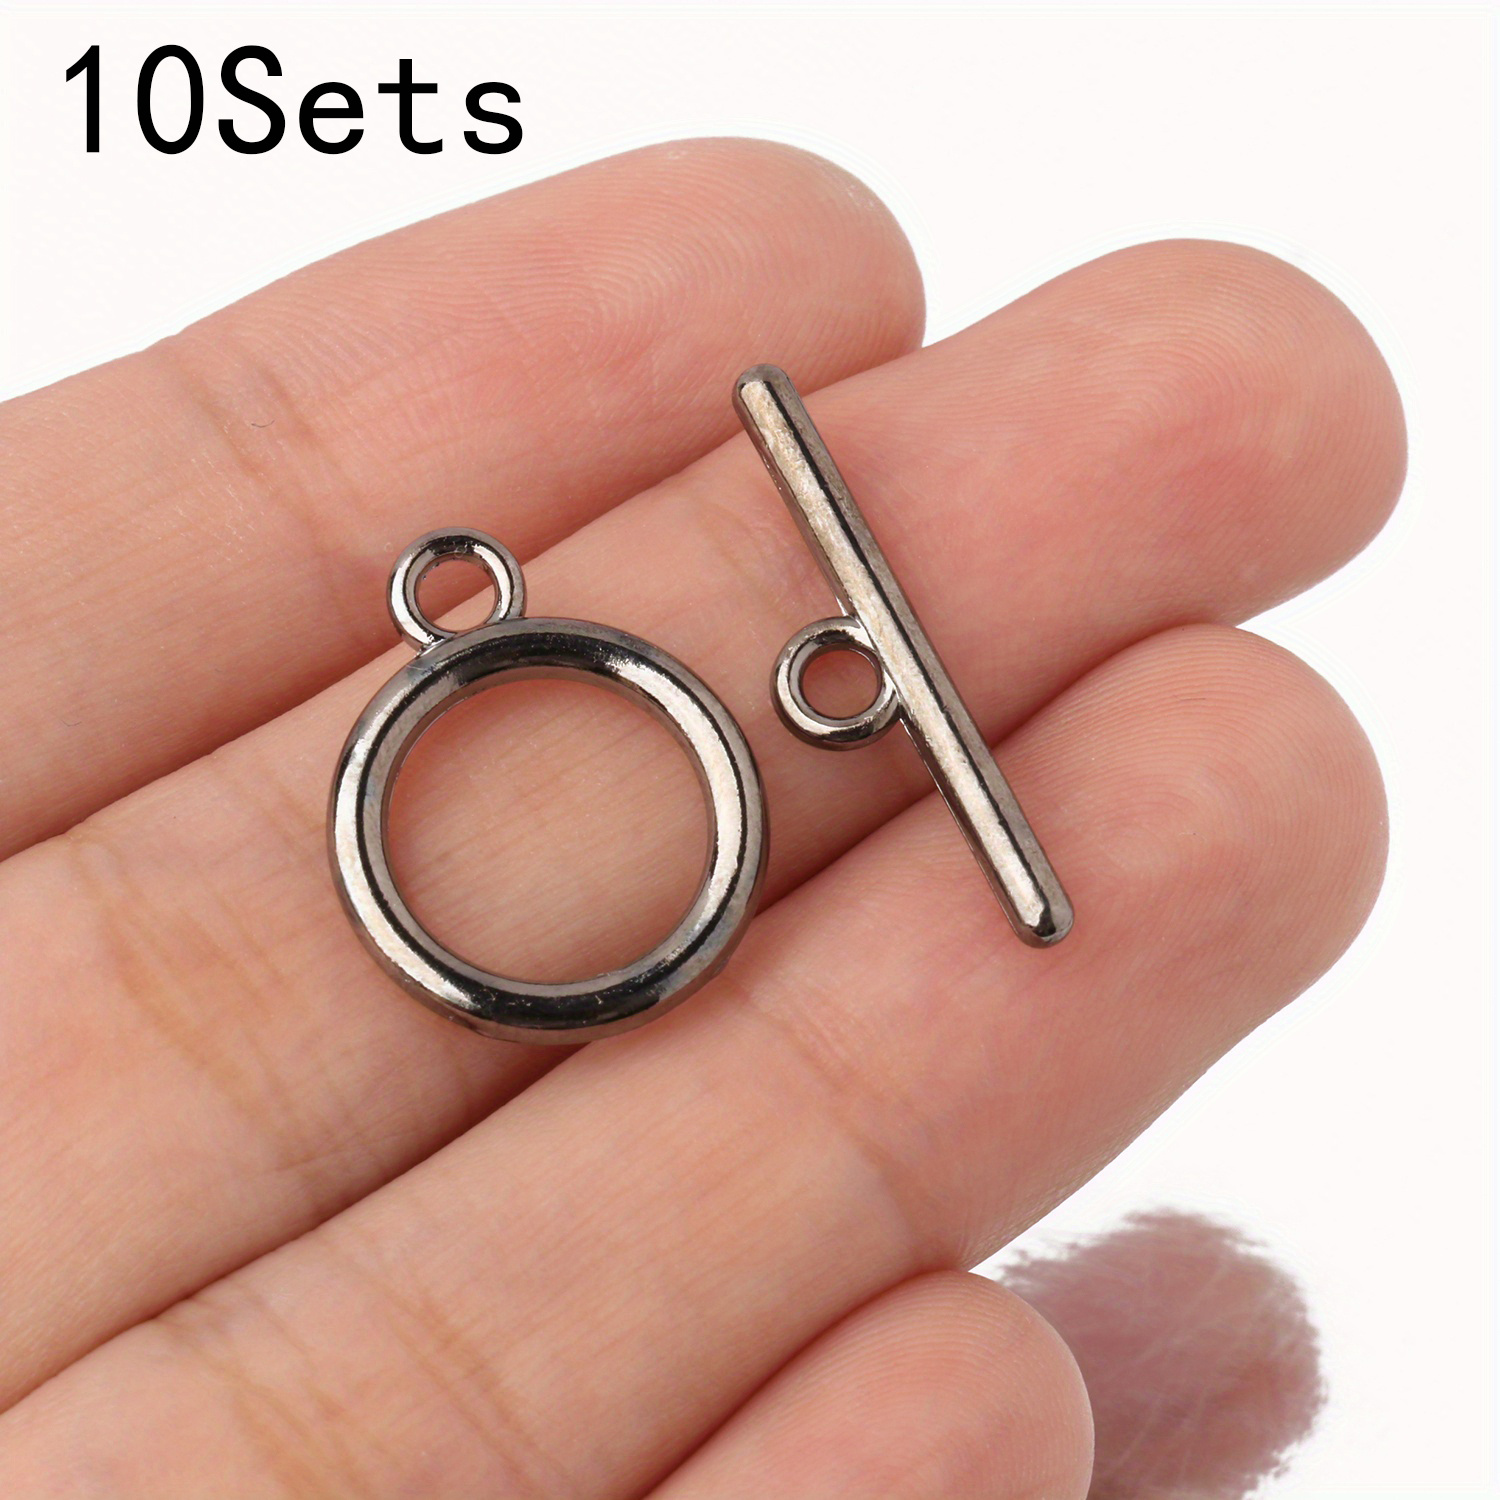 DIY Jewelry Making: Of Alloy OT Toggle Clasps For Bracelets And Necklaces  With End Clasp Connectors And Hooks F 68 From Bead118, $16.08